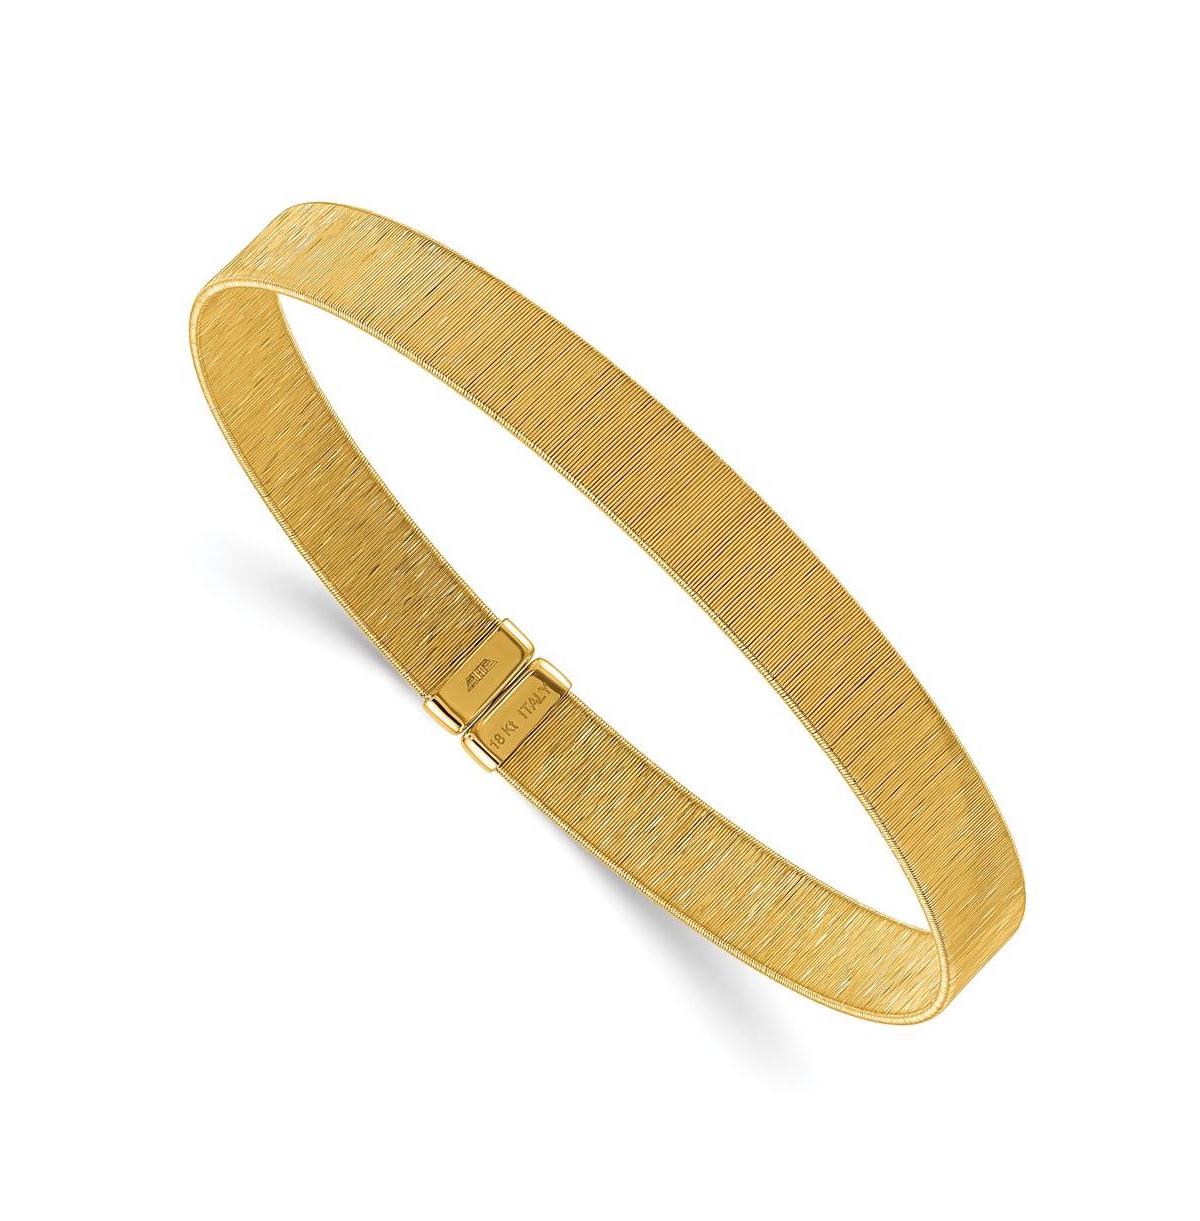 18k Yellow Gold and Textured 7.25mm Cuff Bangle Bracelet - Gold